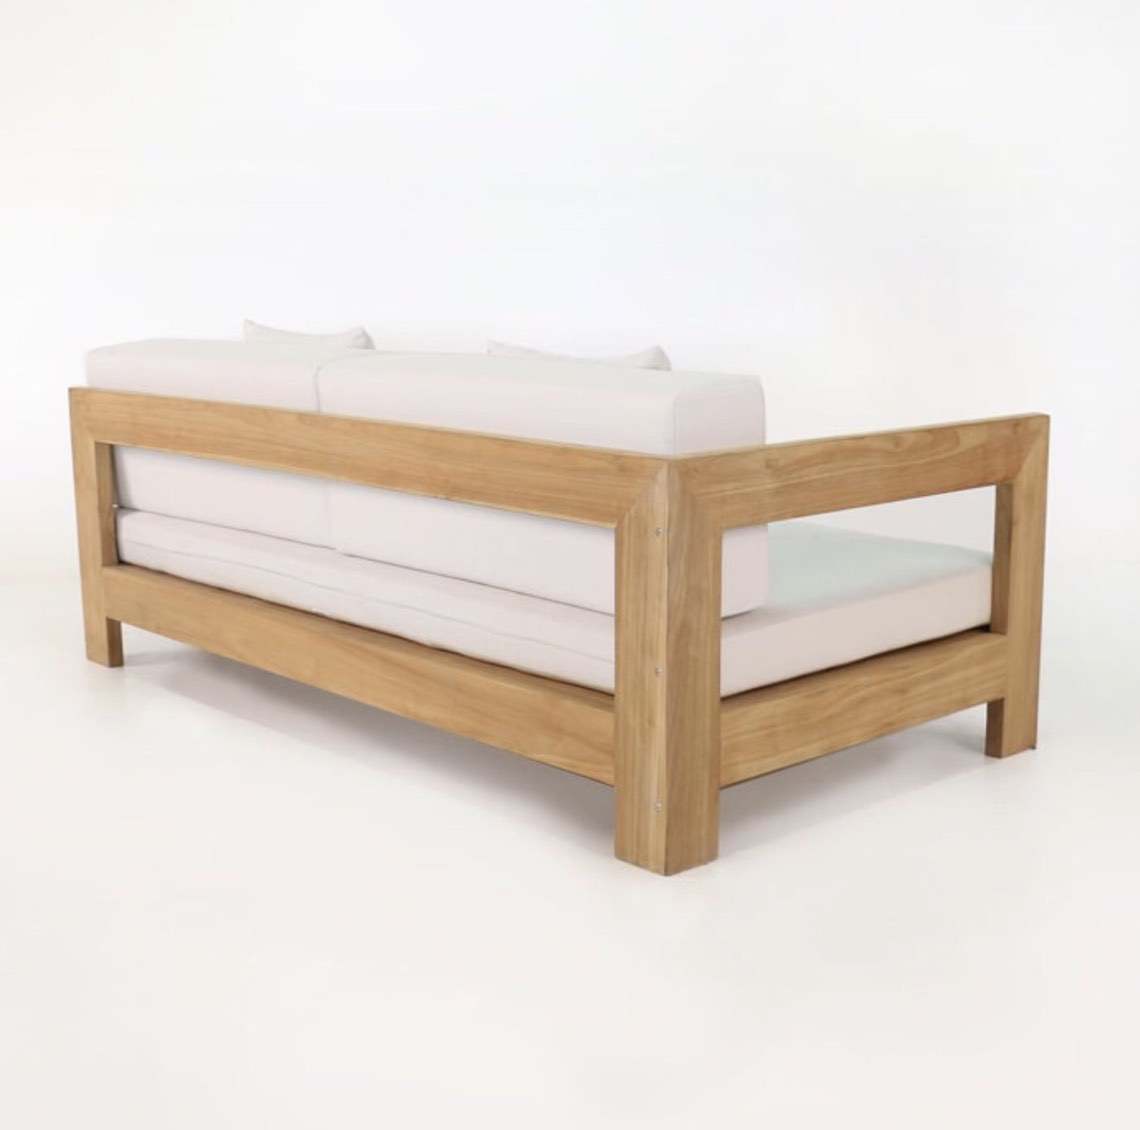 Made to Order Furniture. - Daybed 035-01